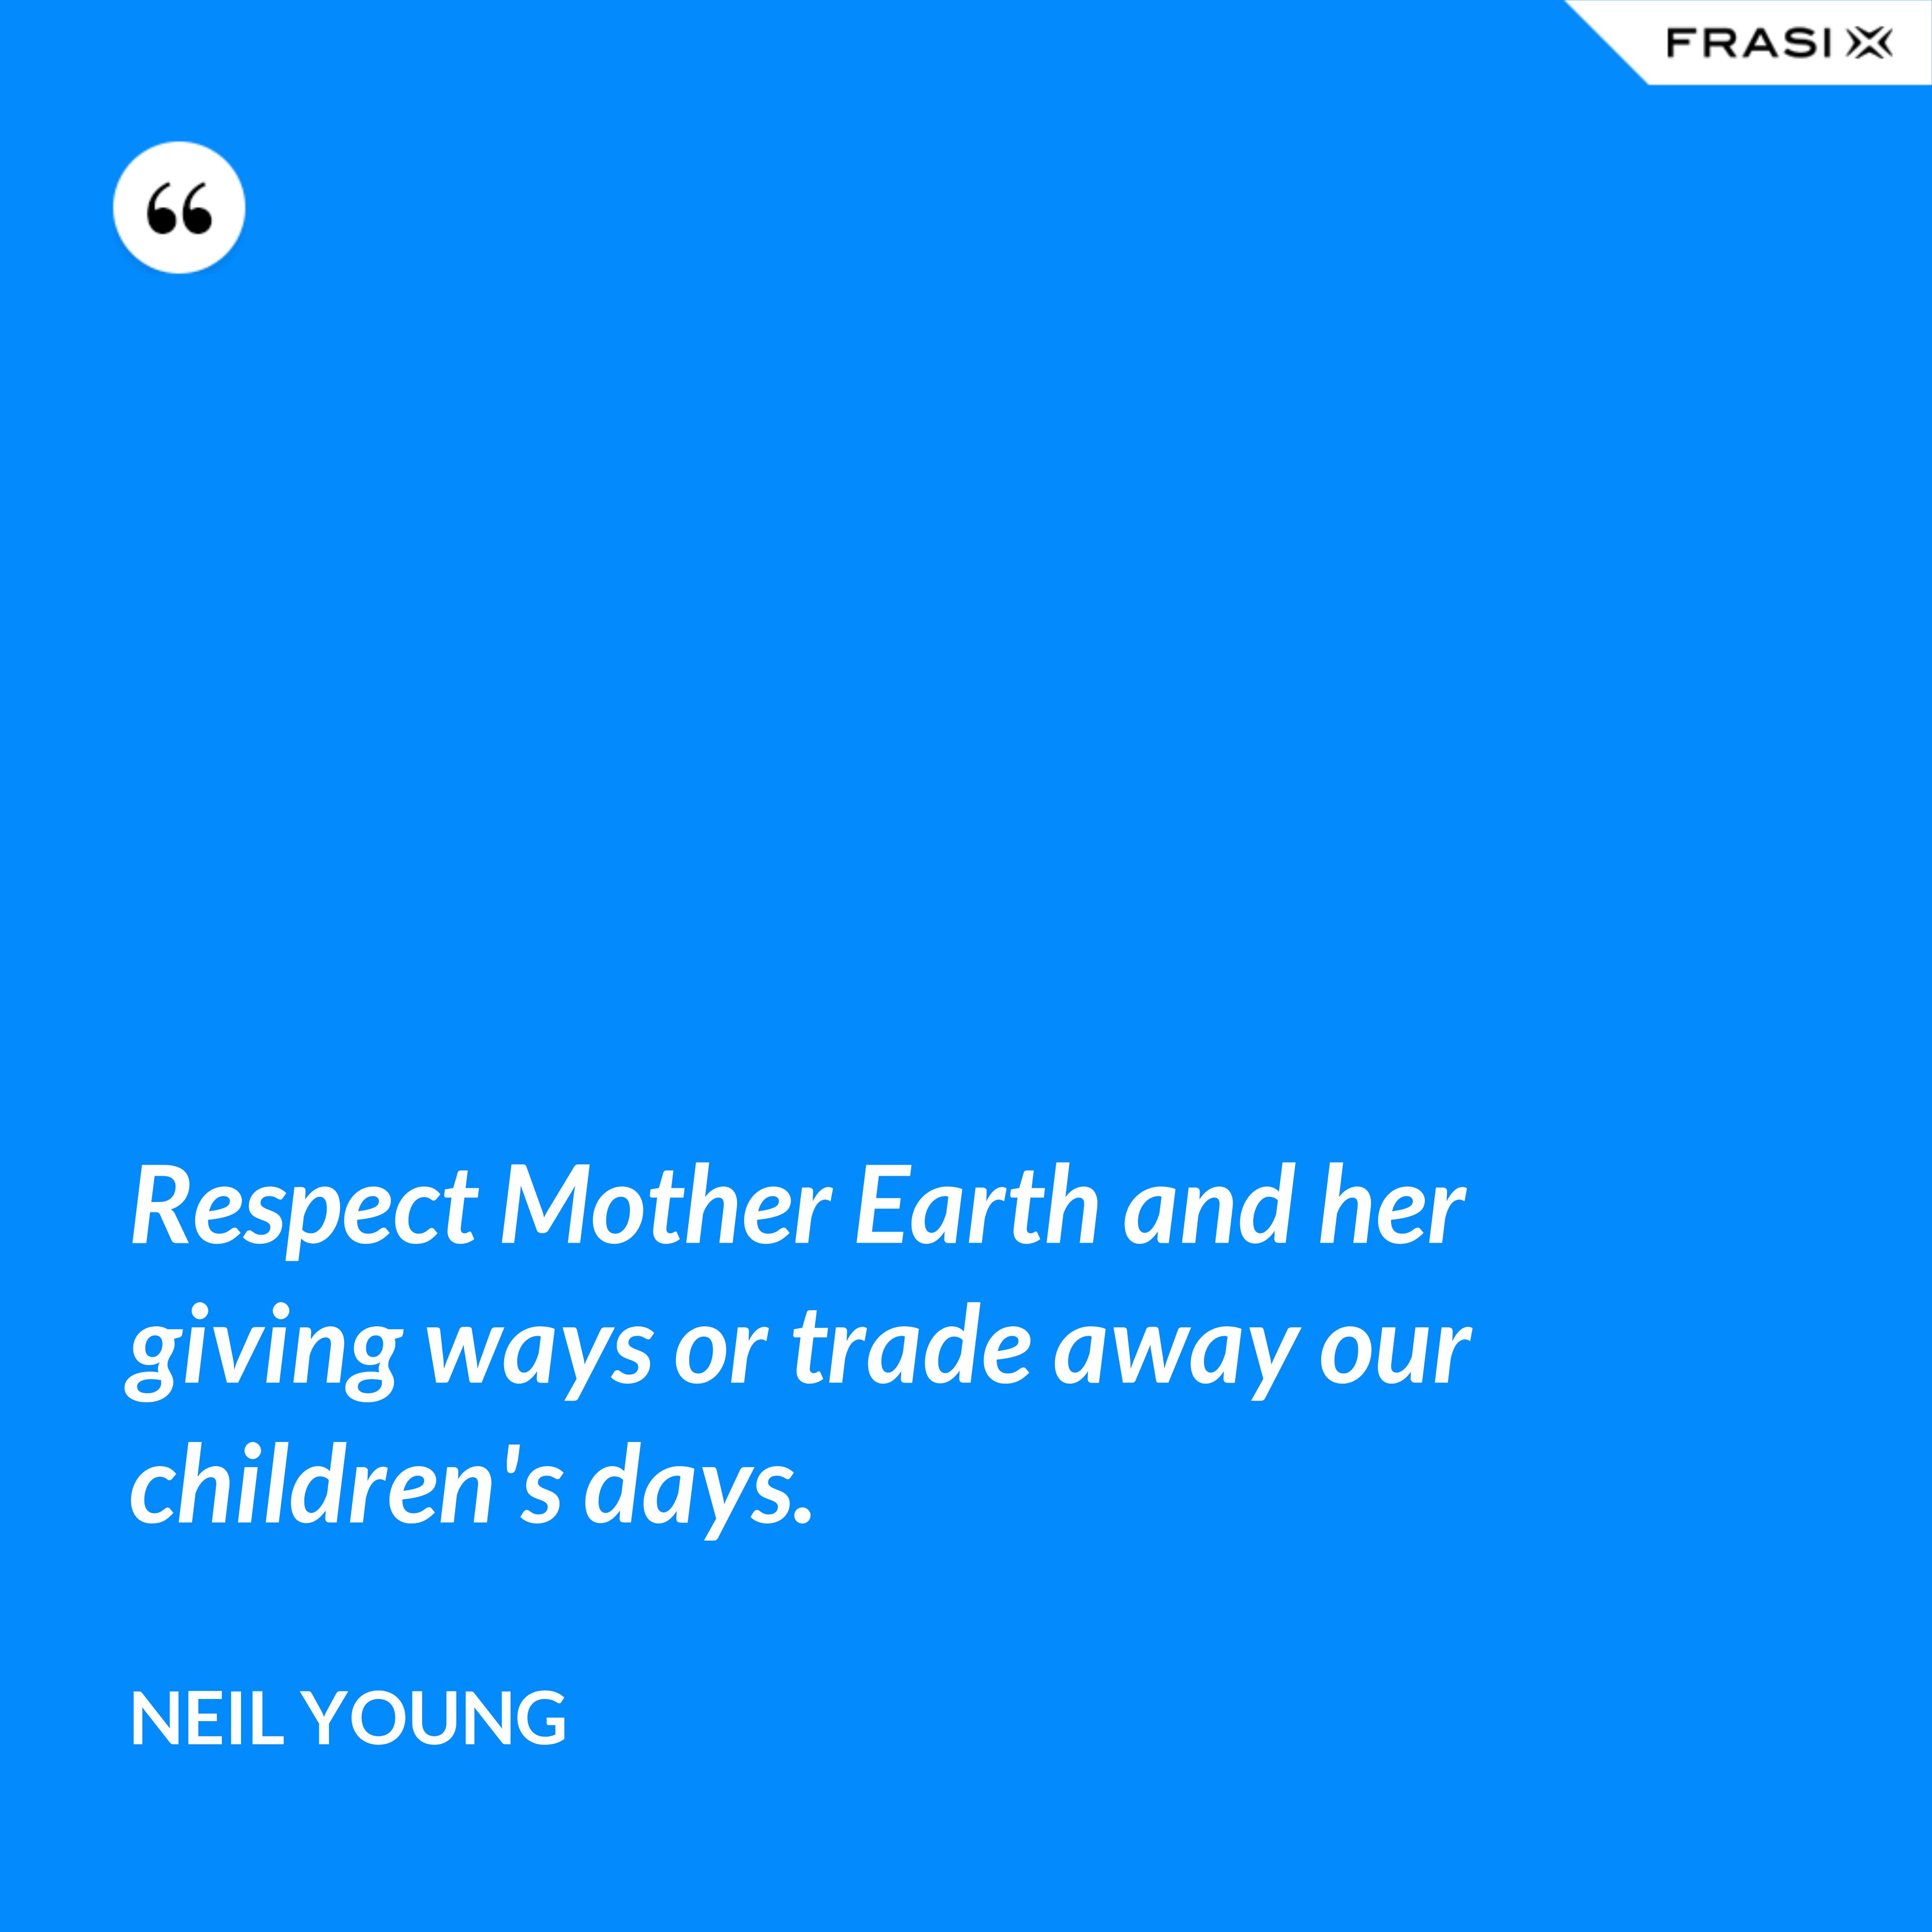 Respect Mother Earth and her giving ways or trade away our children's days. - Neil Young